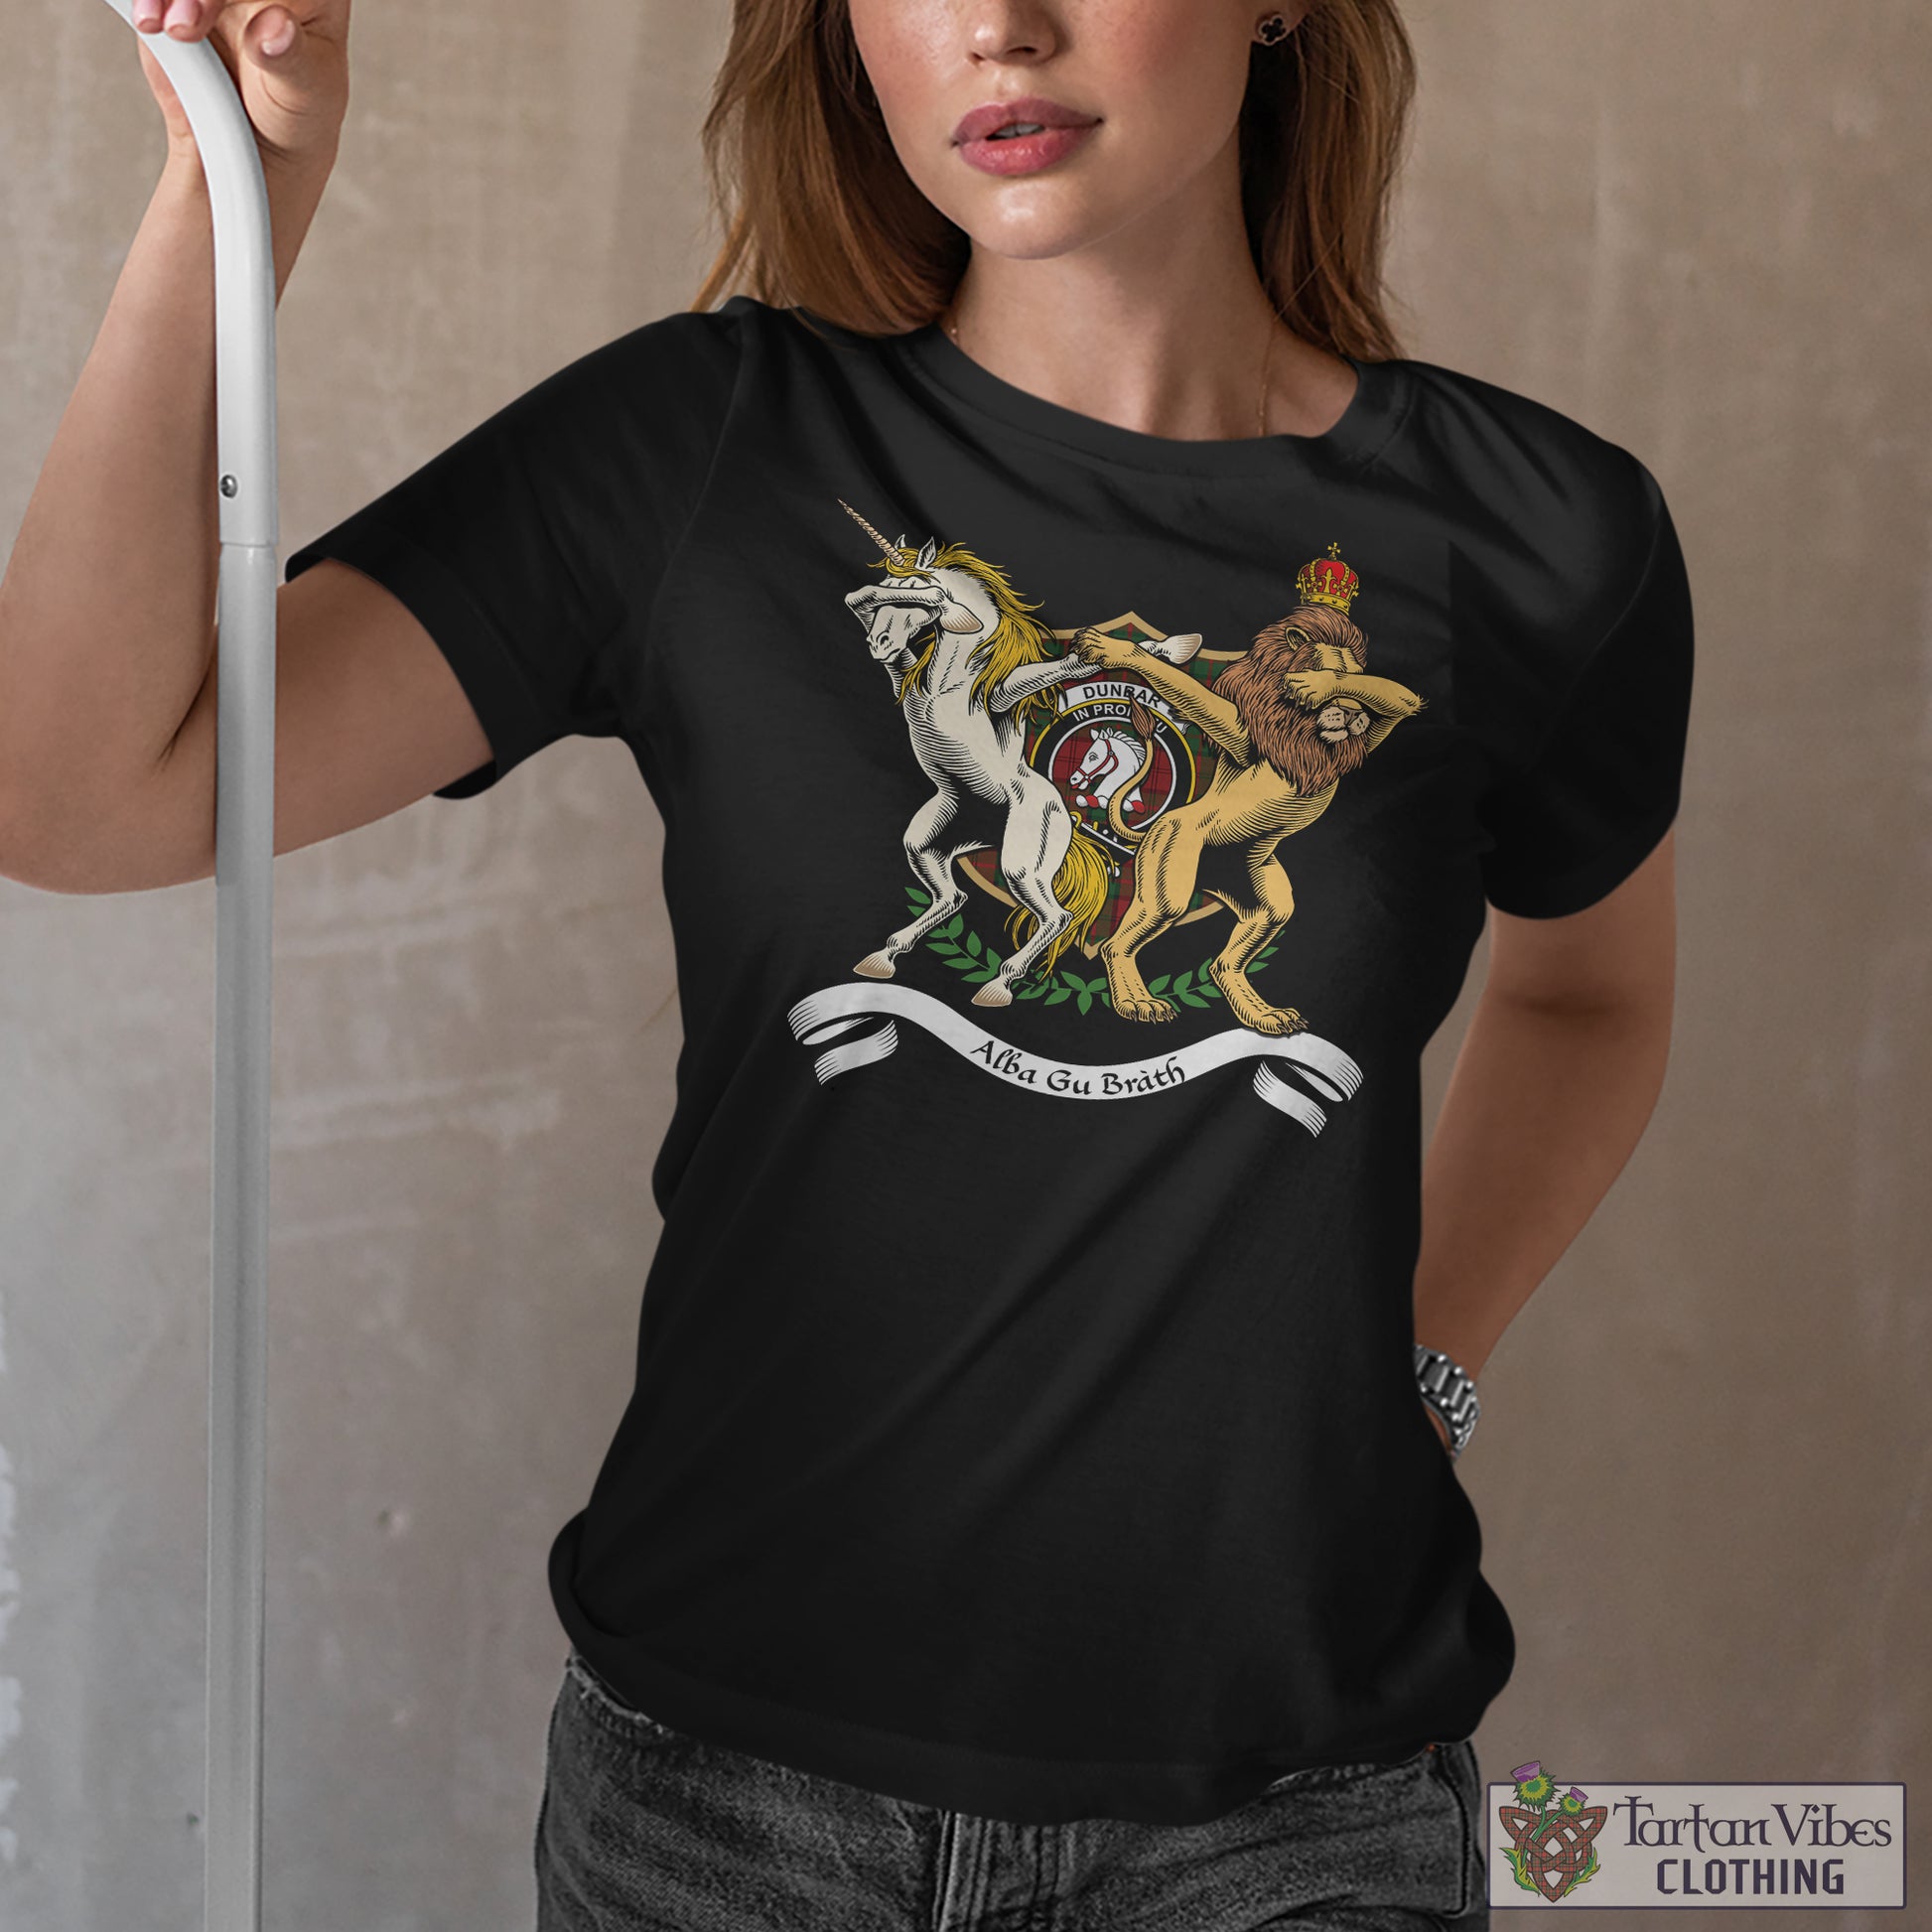 Tartan Vibes Clothing Dunbar Family Crest Cotton Women's T-Shirt with Scotland Royal Coat Of Arm Funny Style